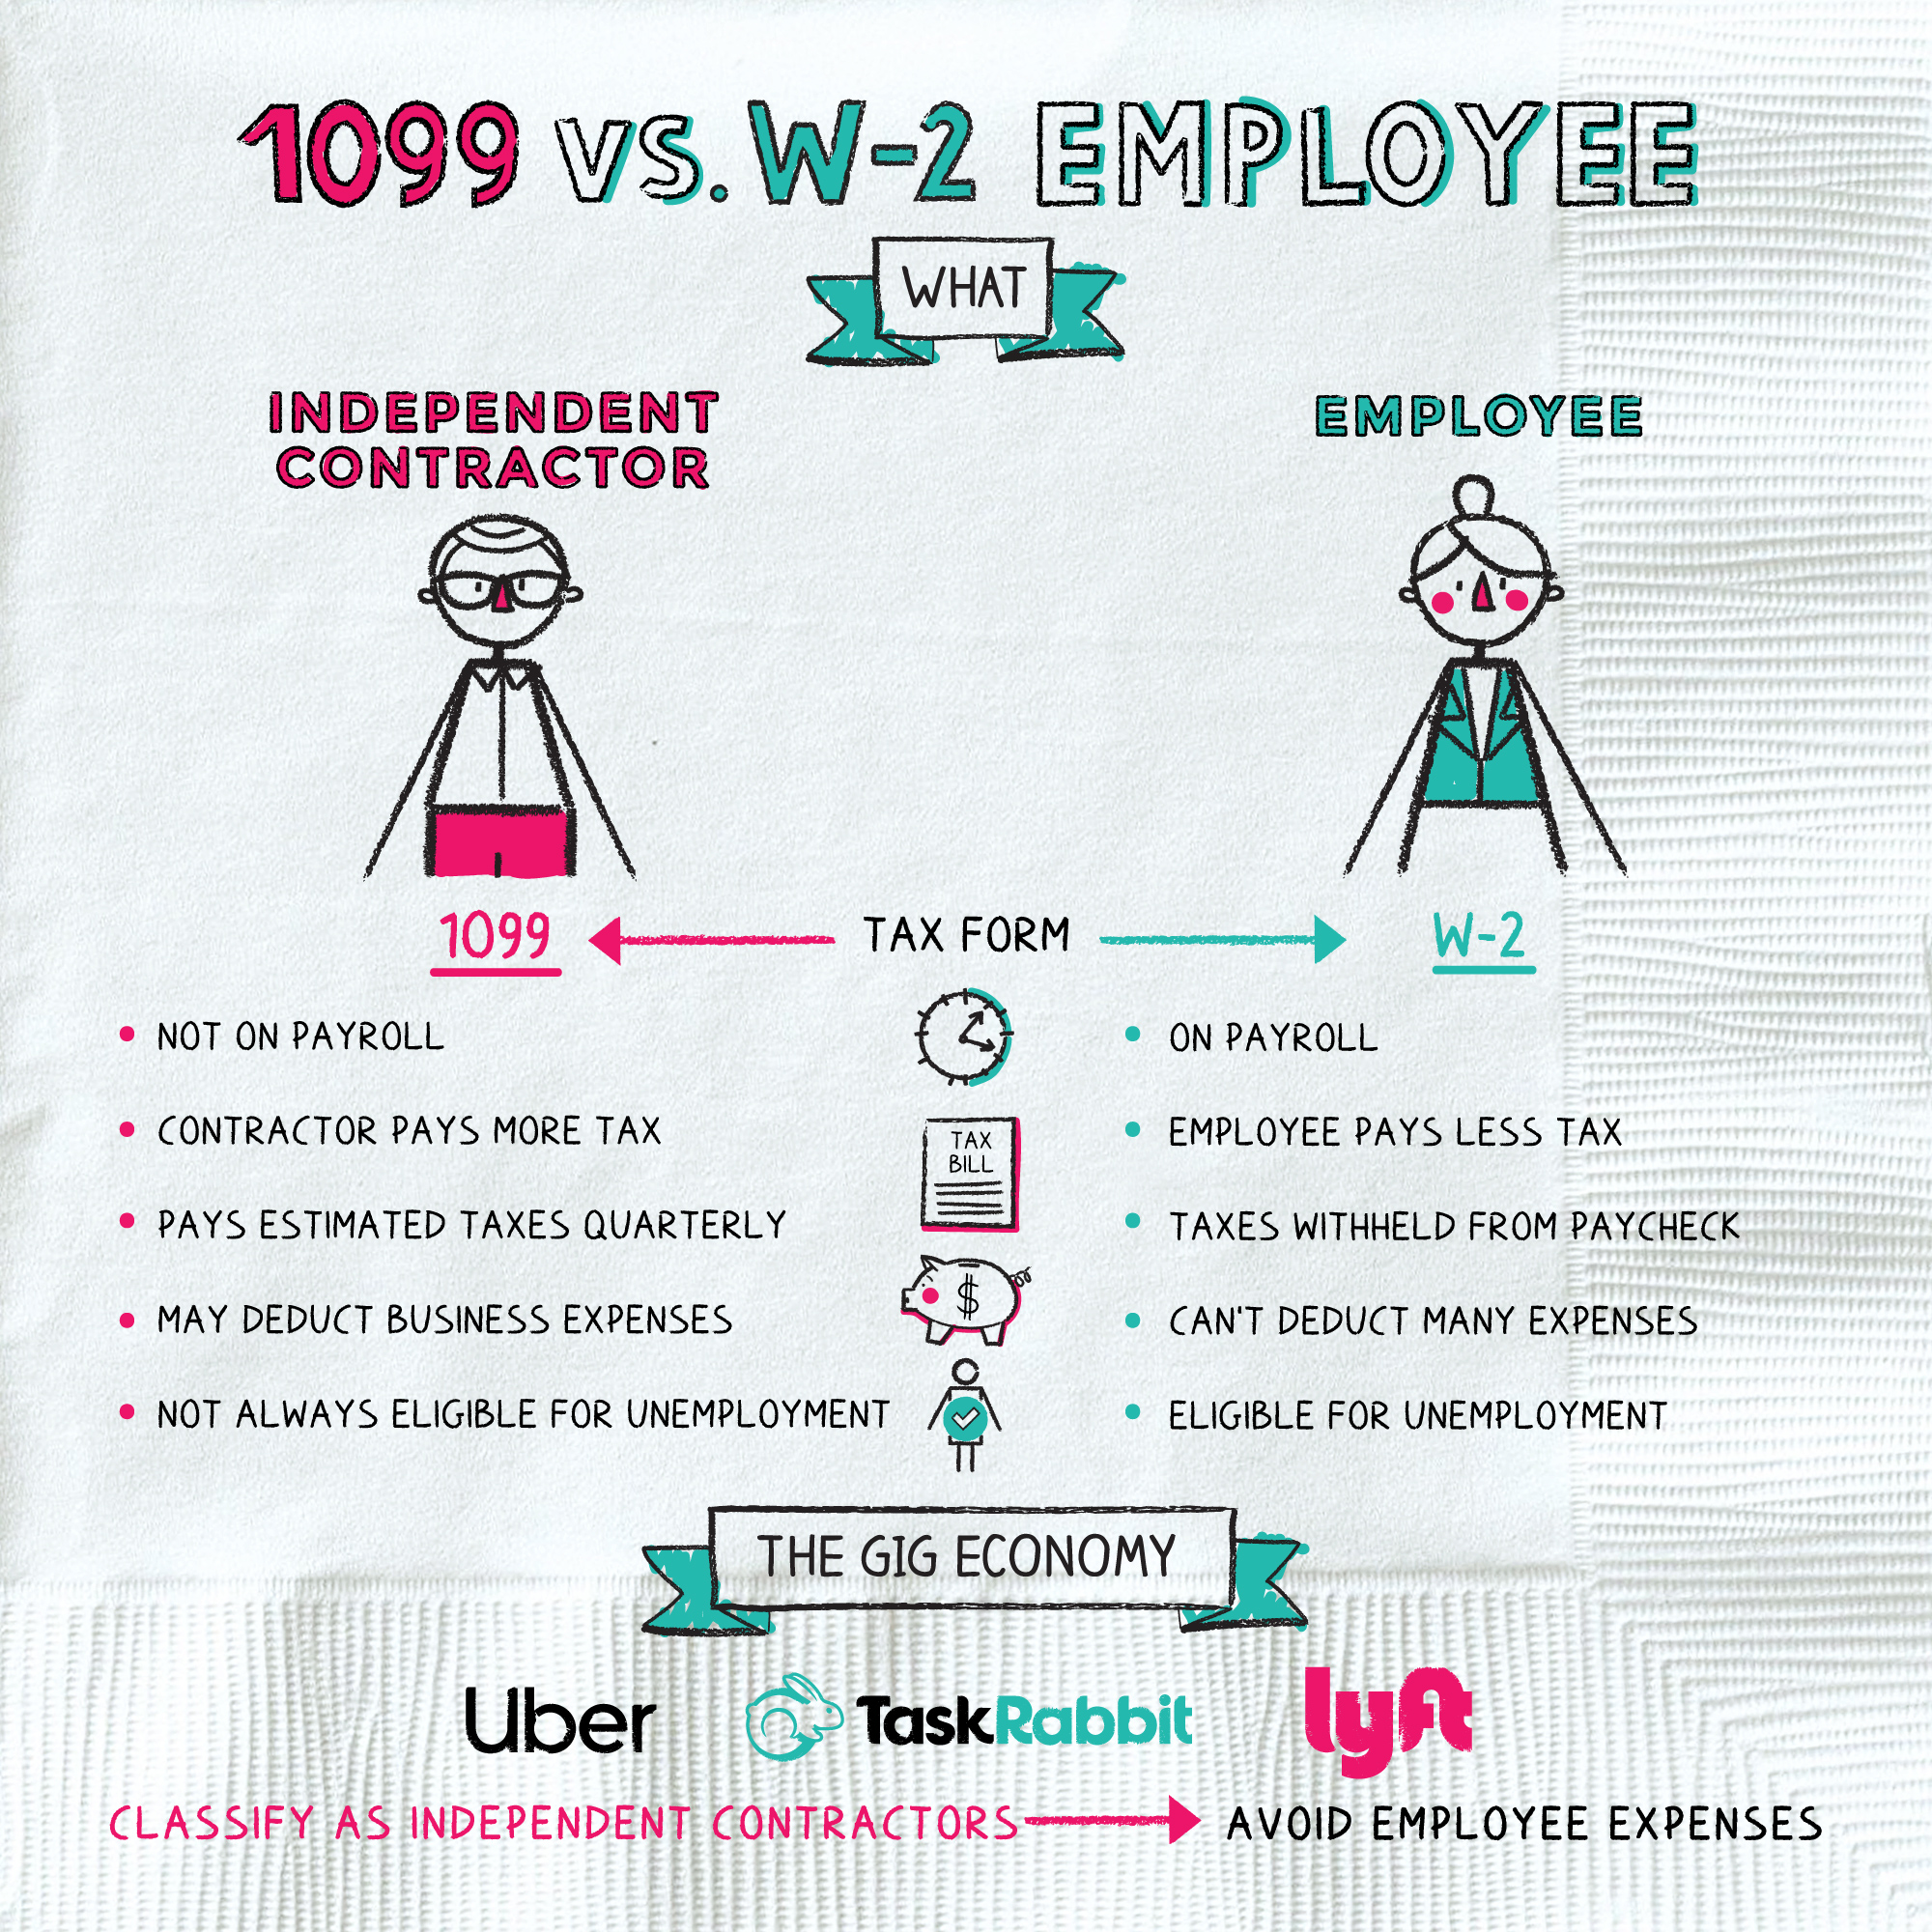 what-is-1099-vs-w-2-employee-napkin-finance-has-your-answer